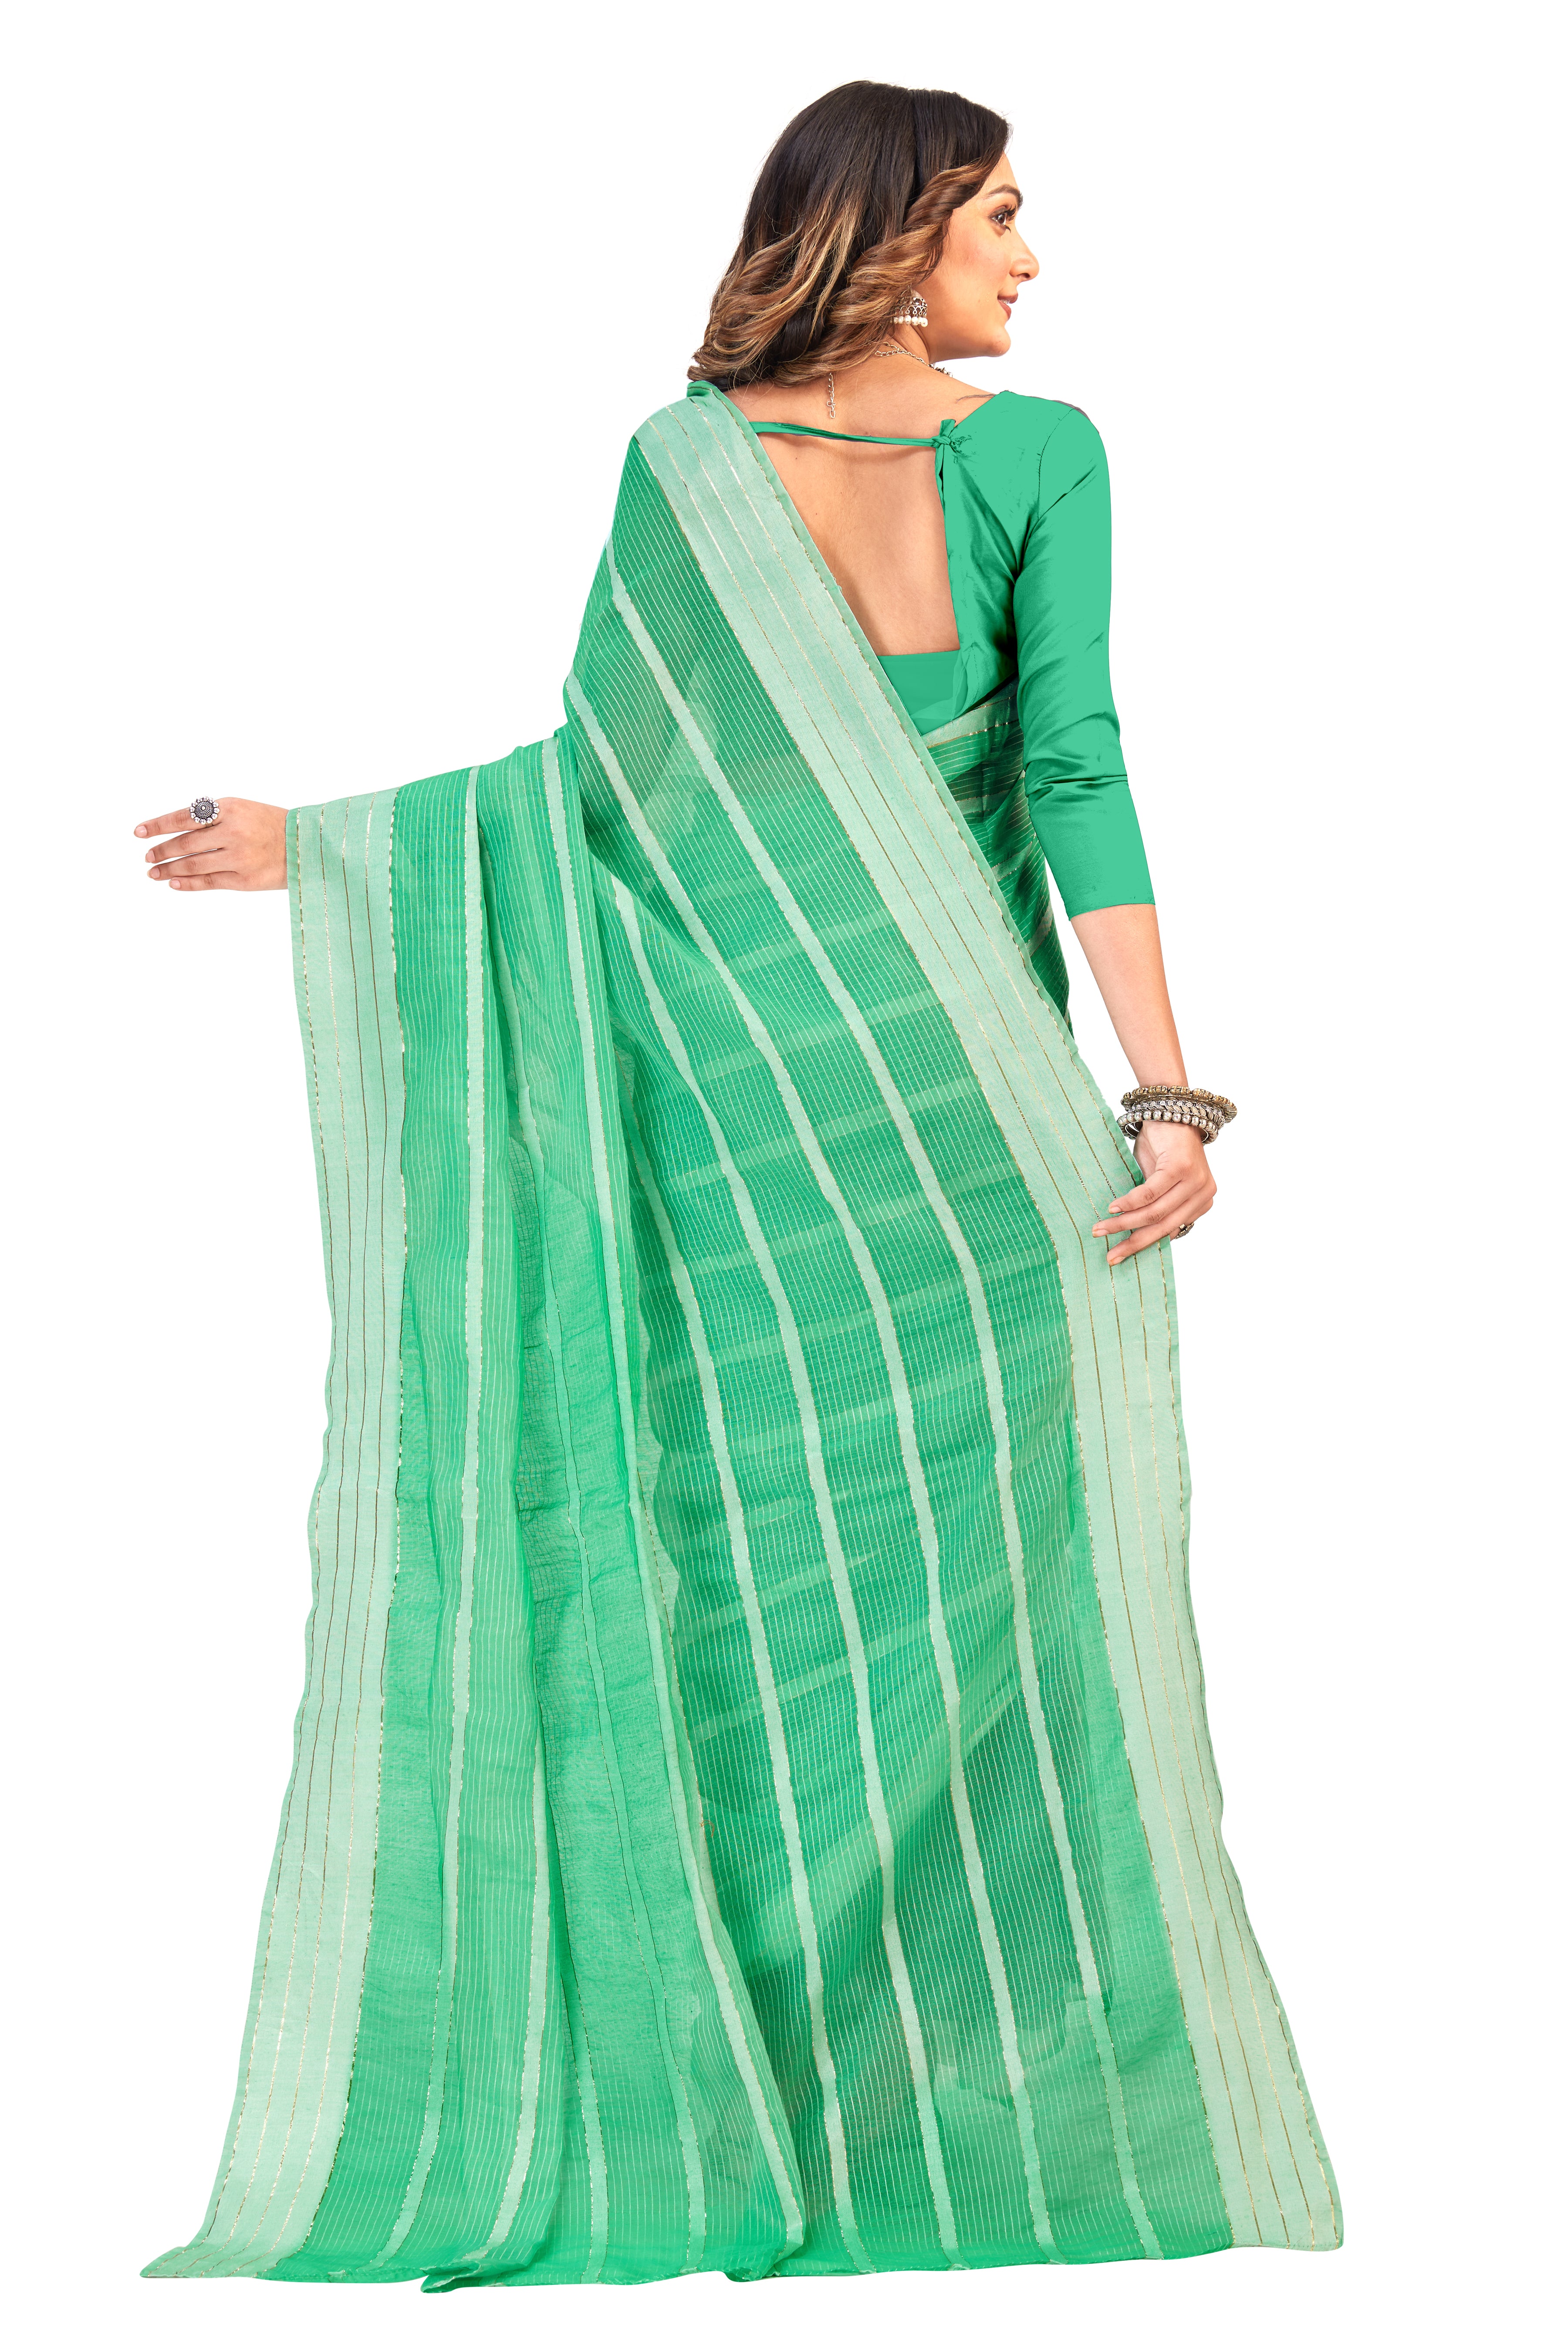 Women's self Woven striped Daily Wear Cotton Blend Sari With Blouse Piece (Rama) - NIMIDHYA